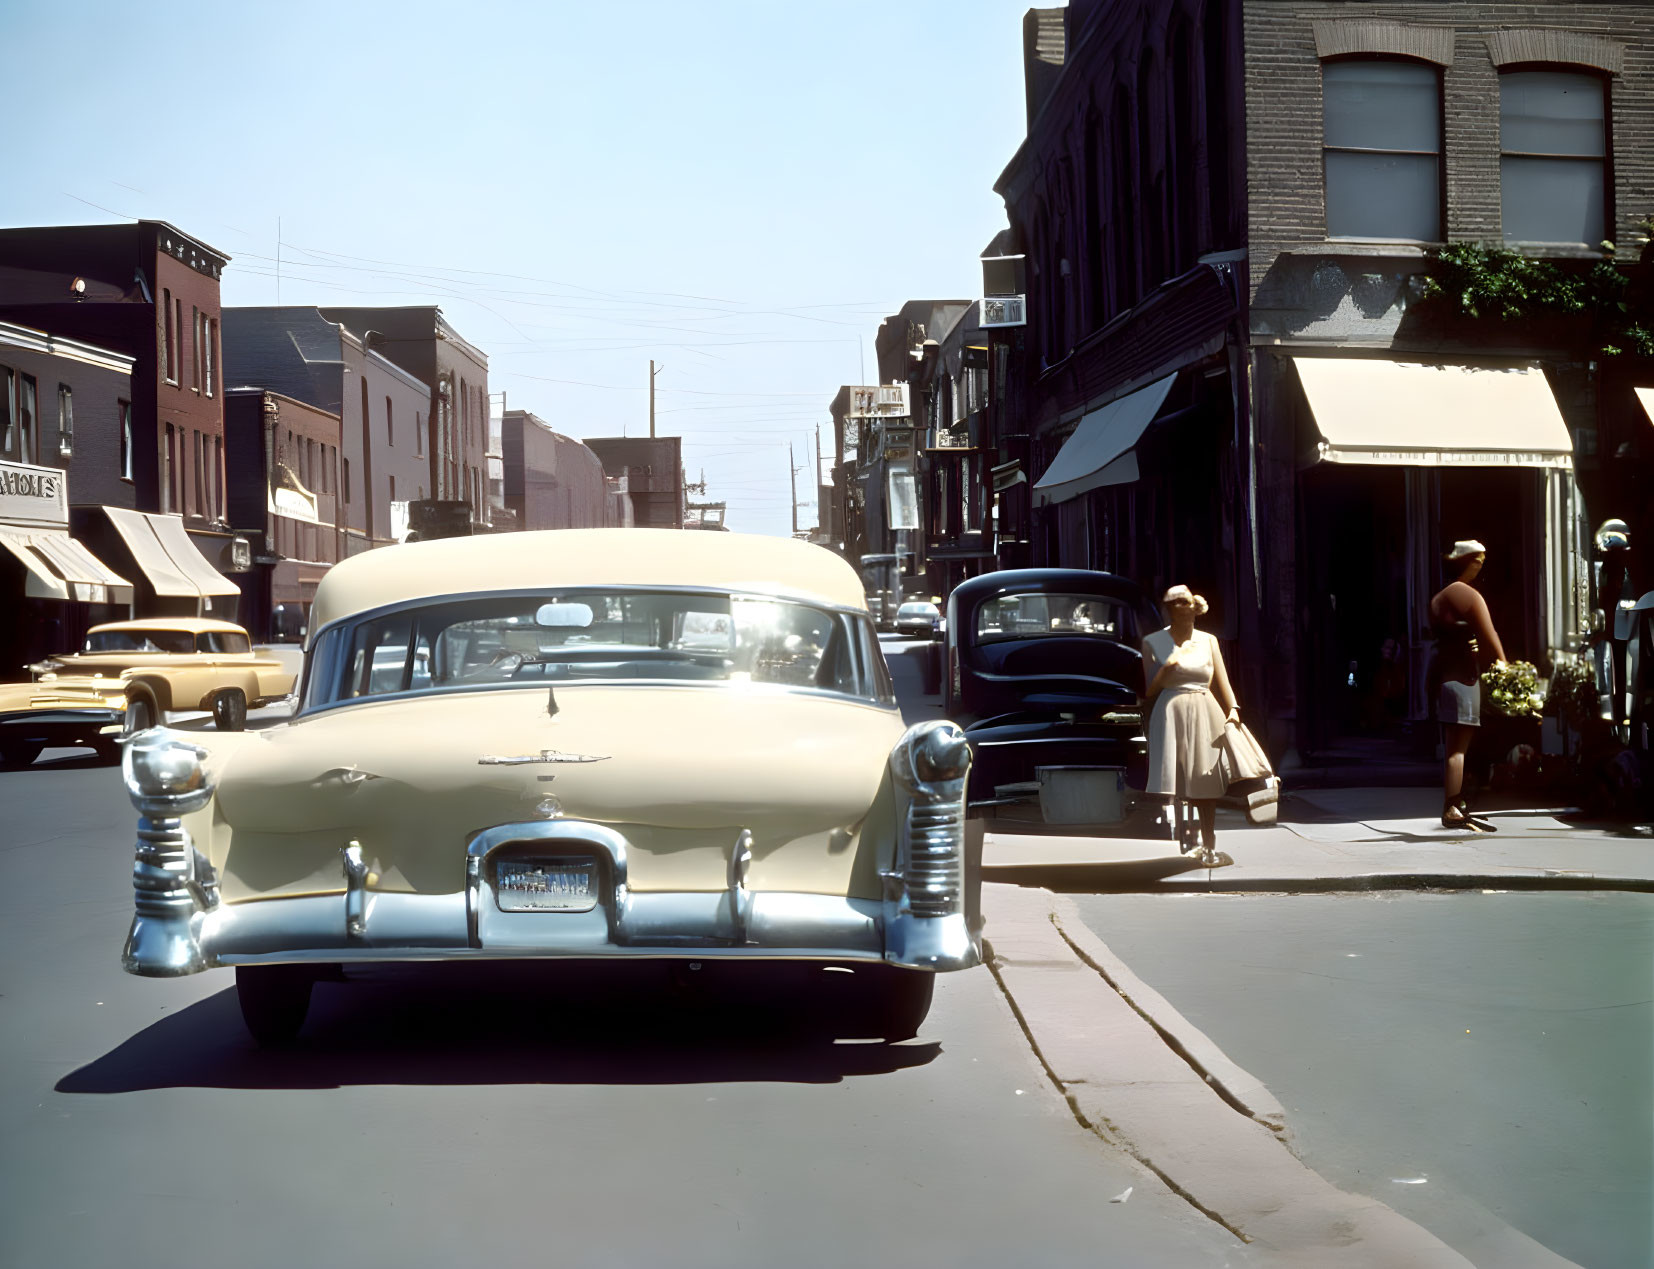 Classic cars, pedestrians, and old buildings in vintage street scene